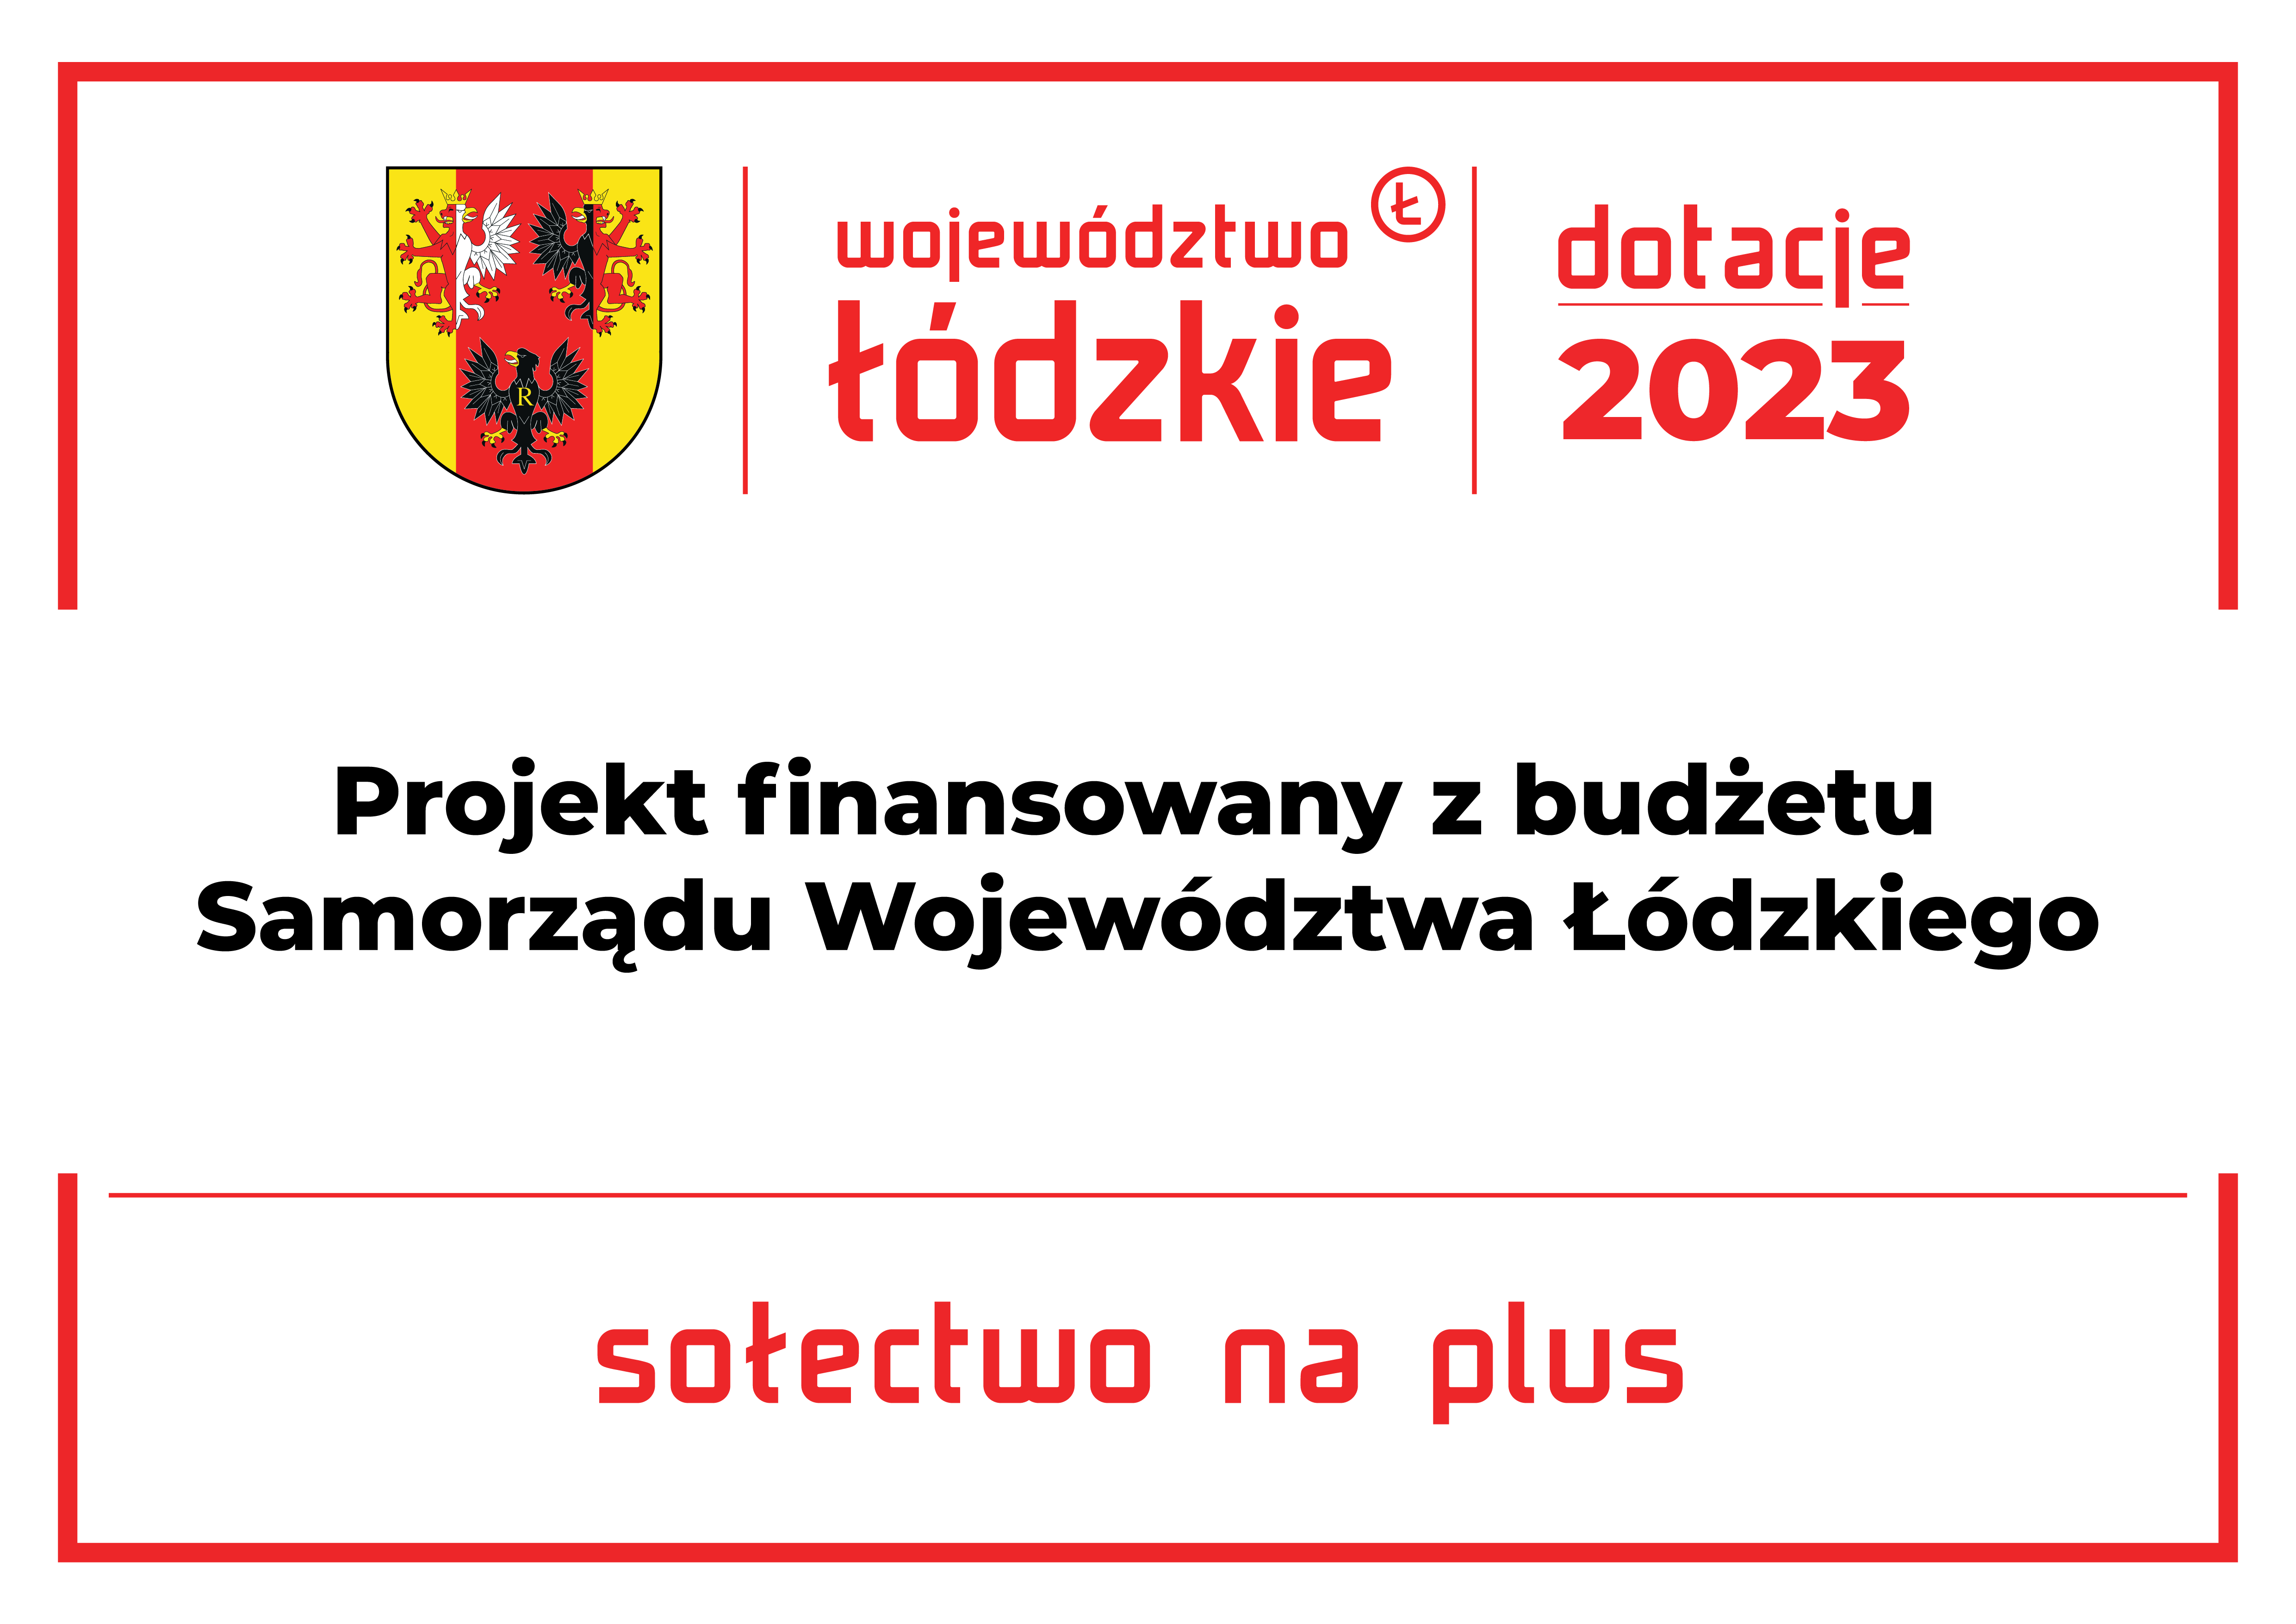 Dotacje 2023 Tablice Solectwo na Plus finans